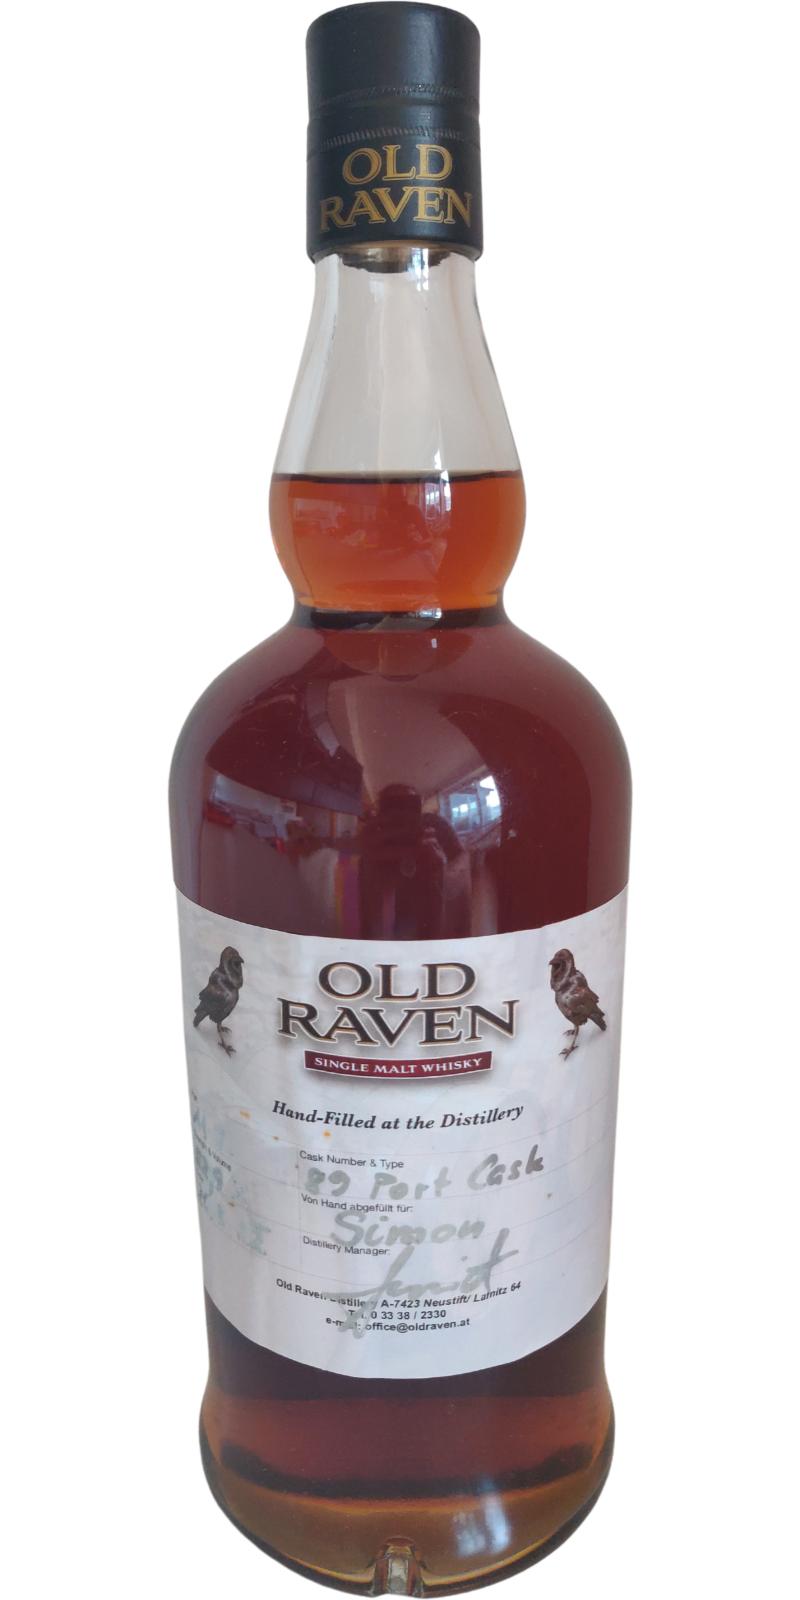 Old Raven 11-year-old